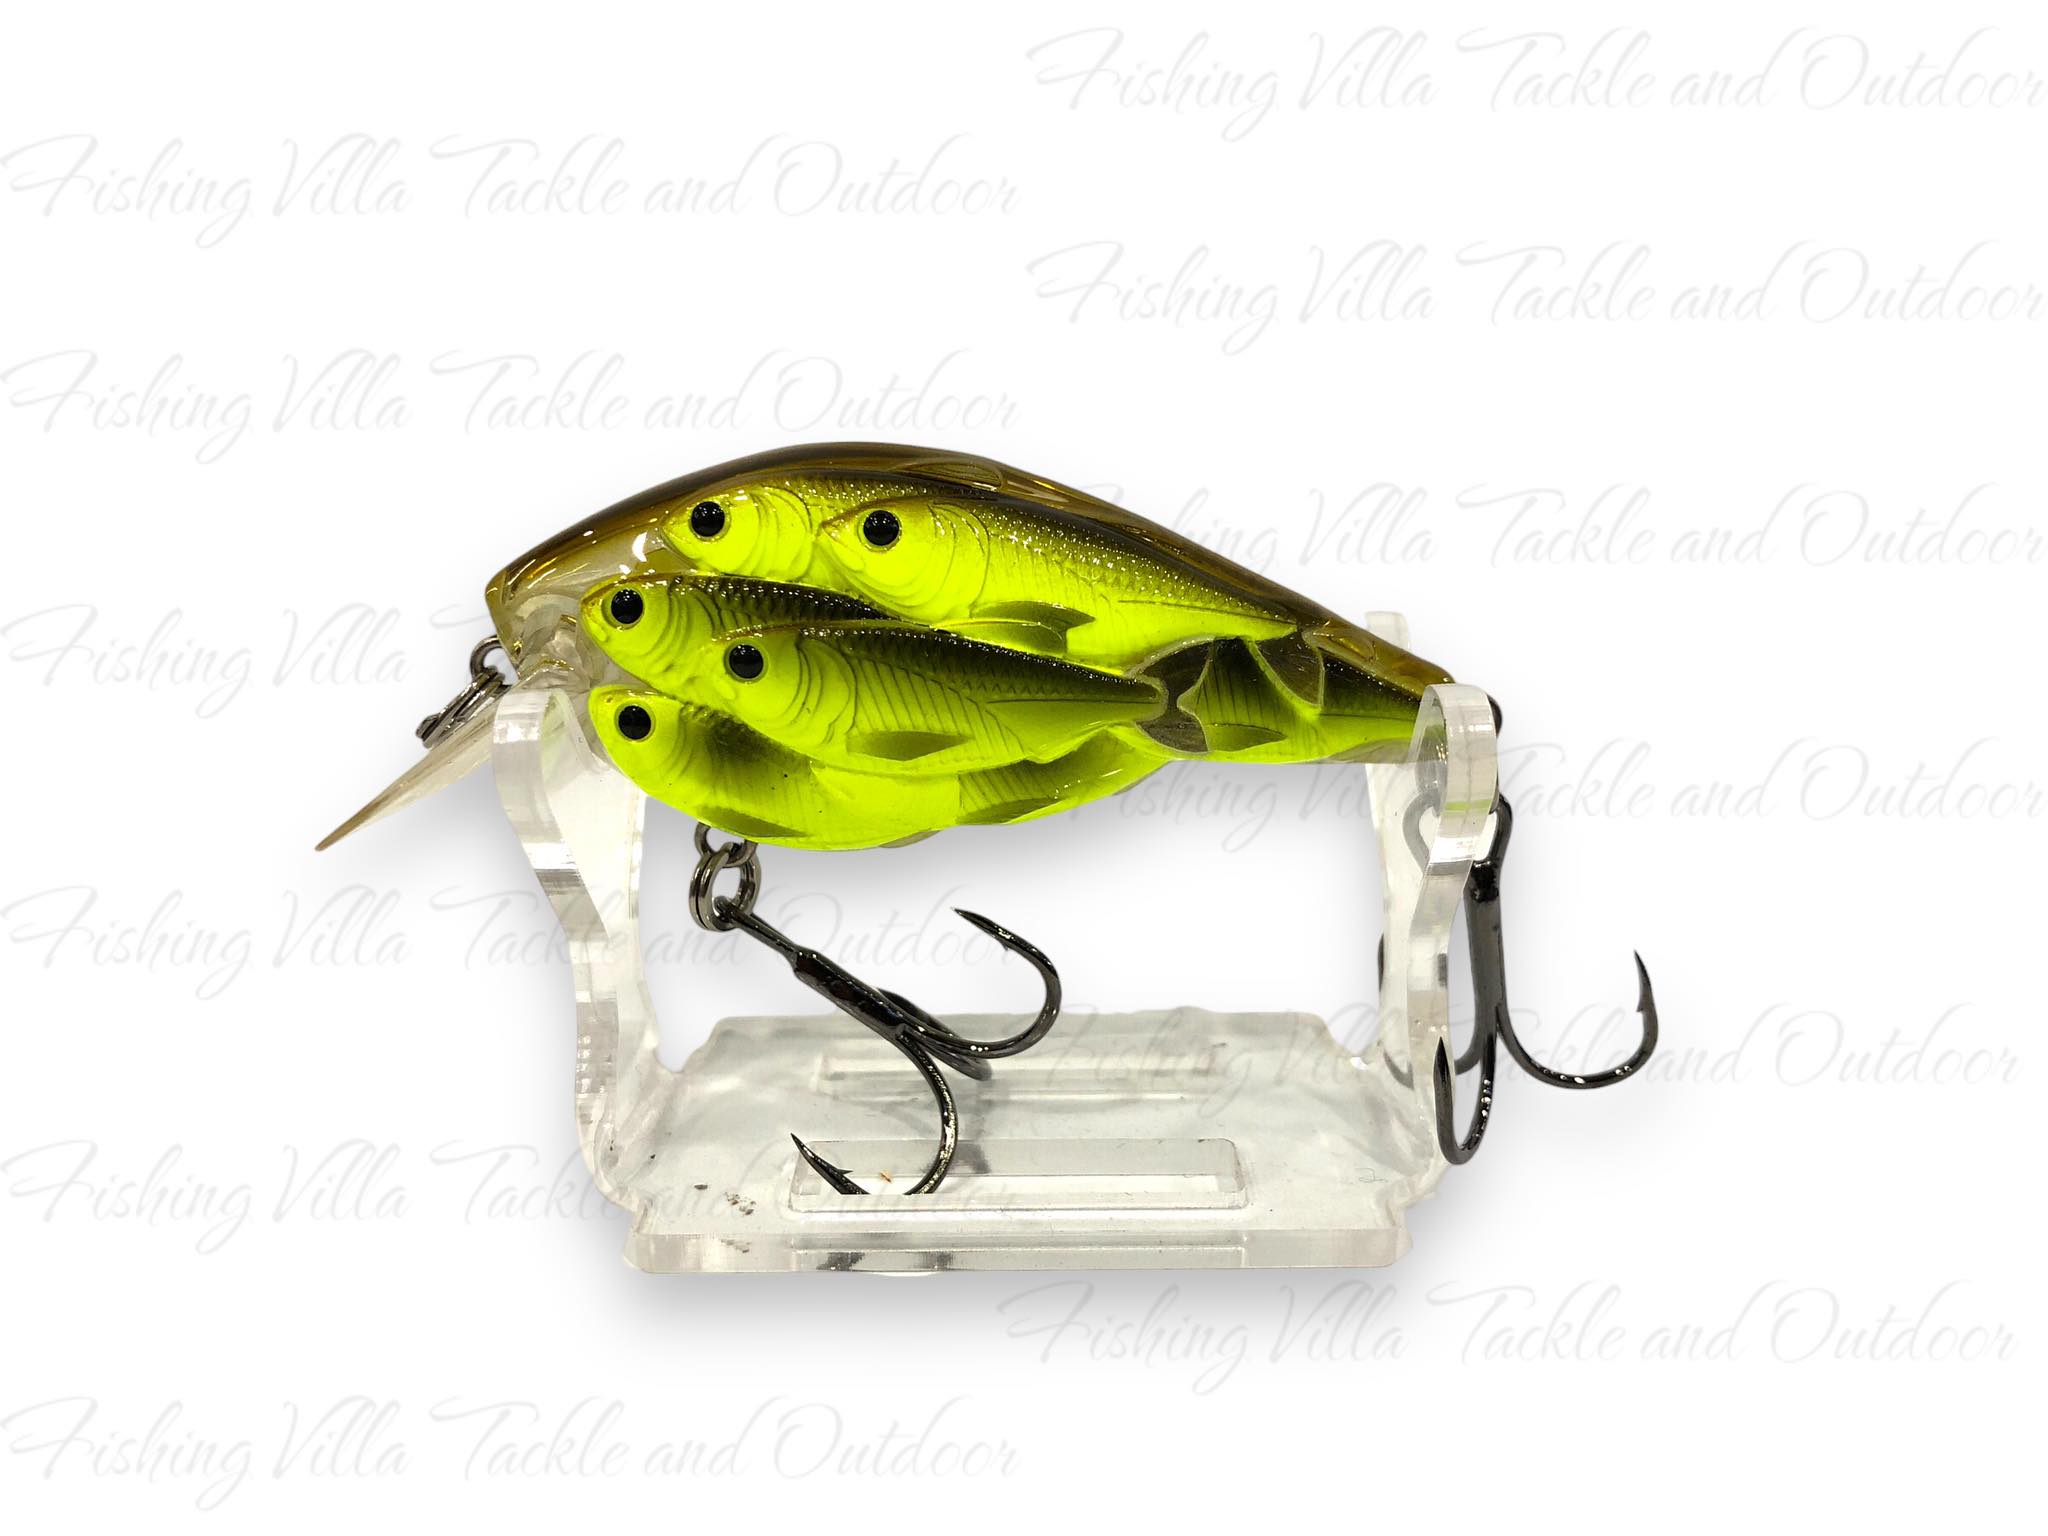 LIVETARGET Yearling Bait Ball Square Bill